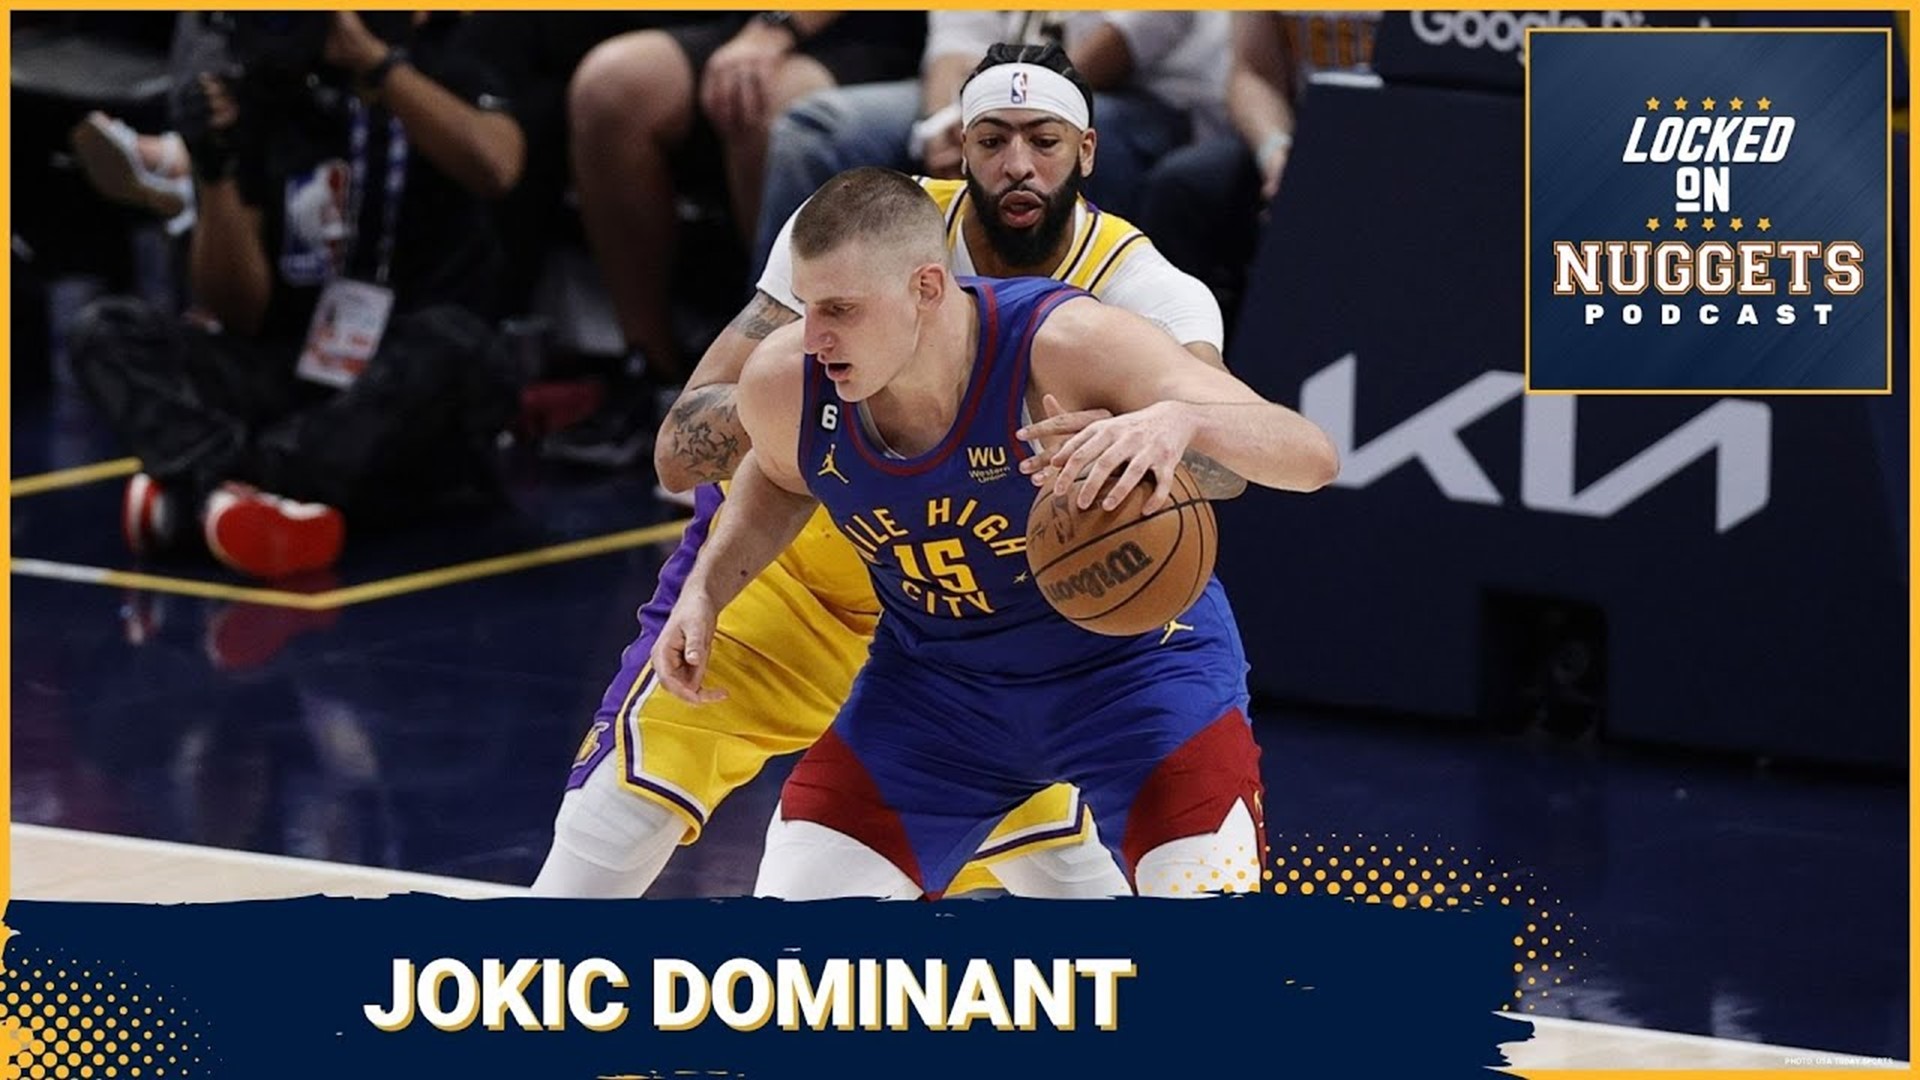 The Nuggets get out to a monster lead vs. the Lakers in Game 1 behind a dominant, all-time performance from Nikola Jokic.